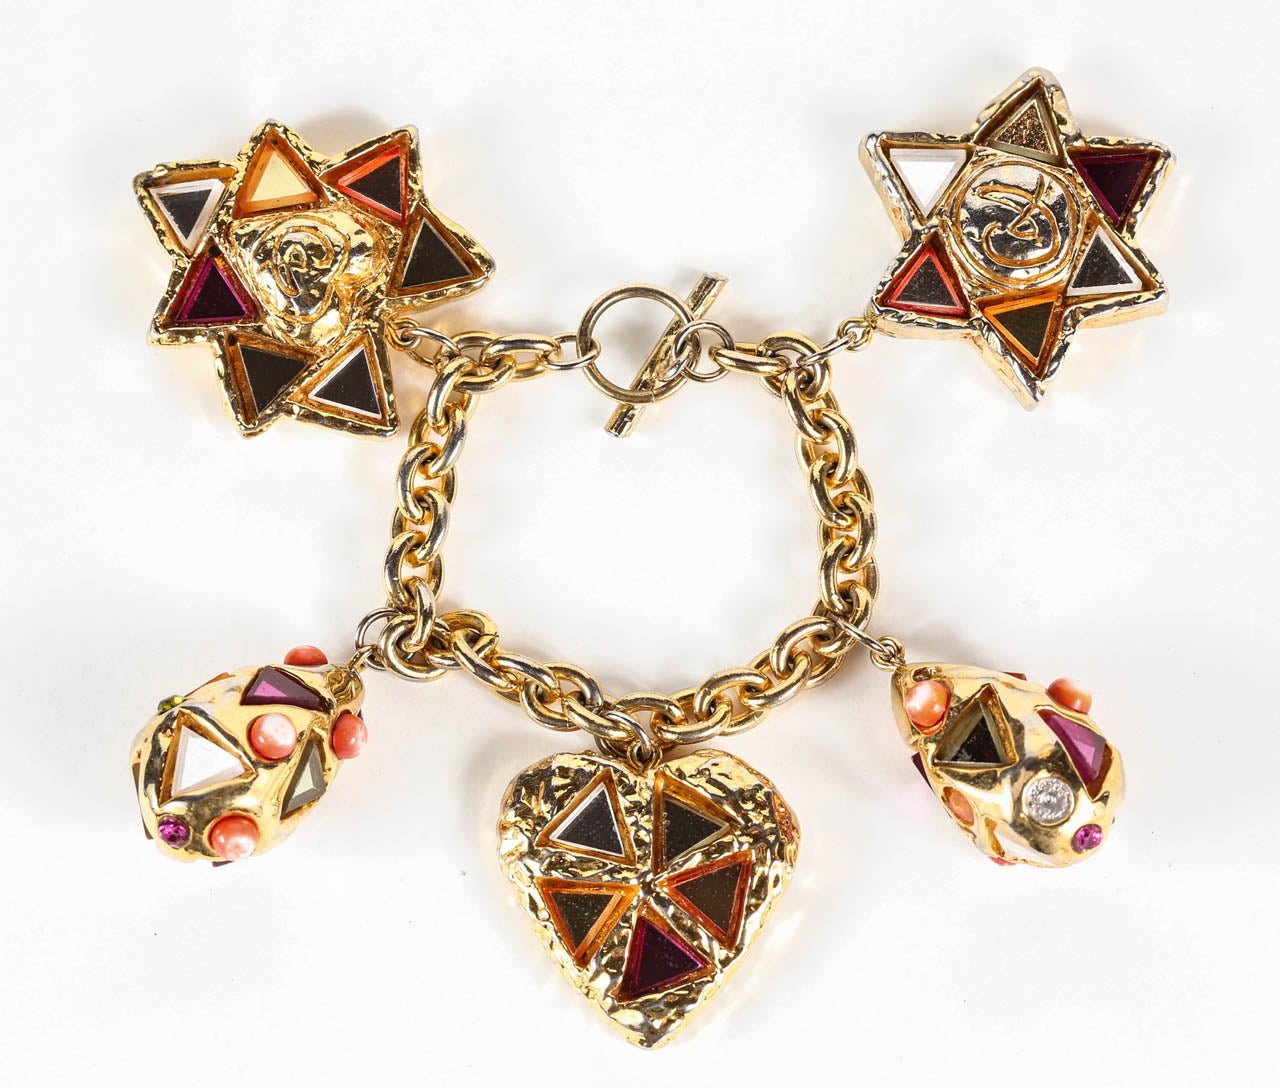 A fun pair of oversized heart ear clips, featuring colorful triangular mirror pieces inset in a textured gilt metal base that bears the CL logo on the front and a the 